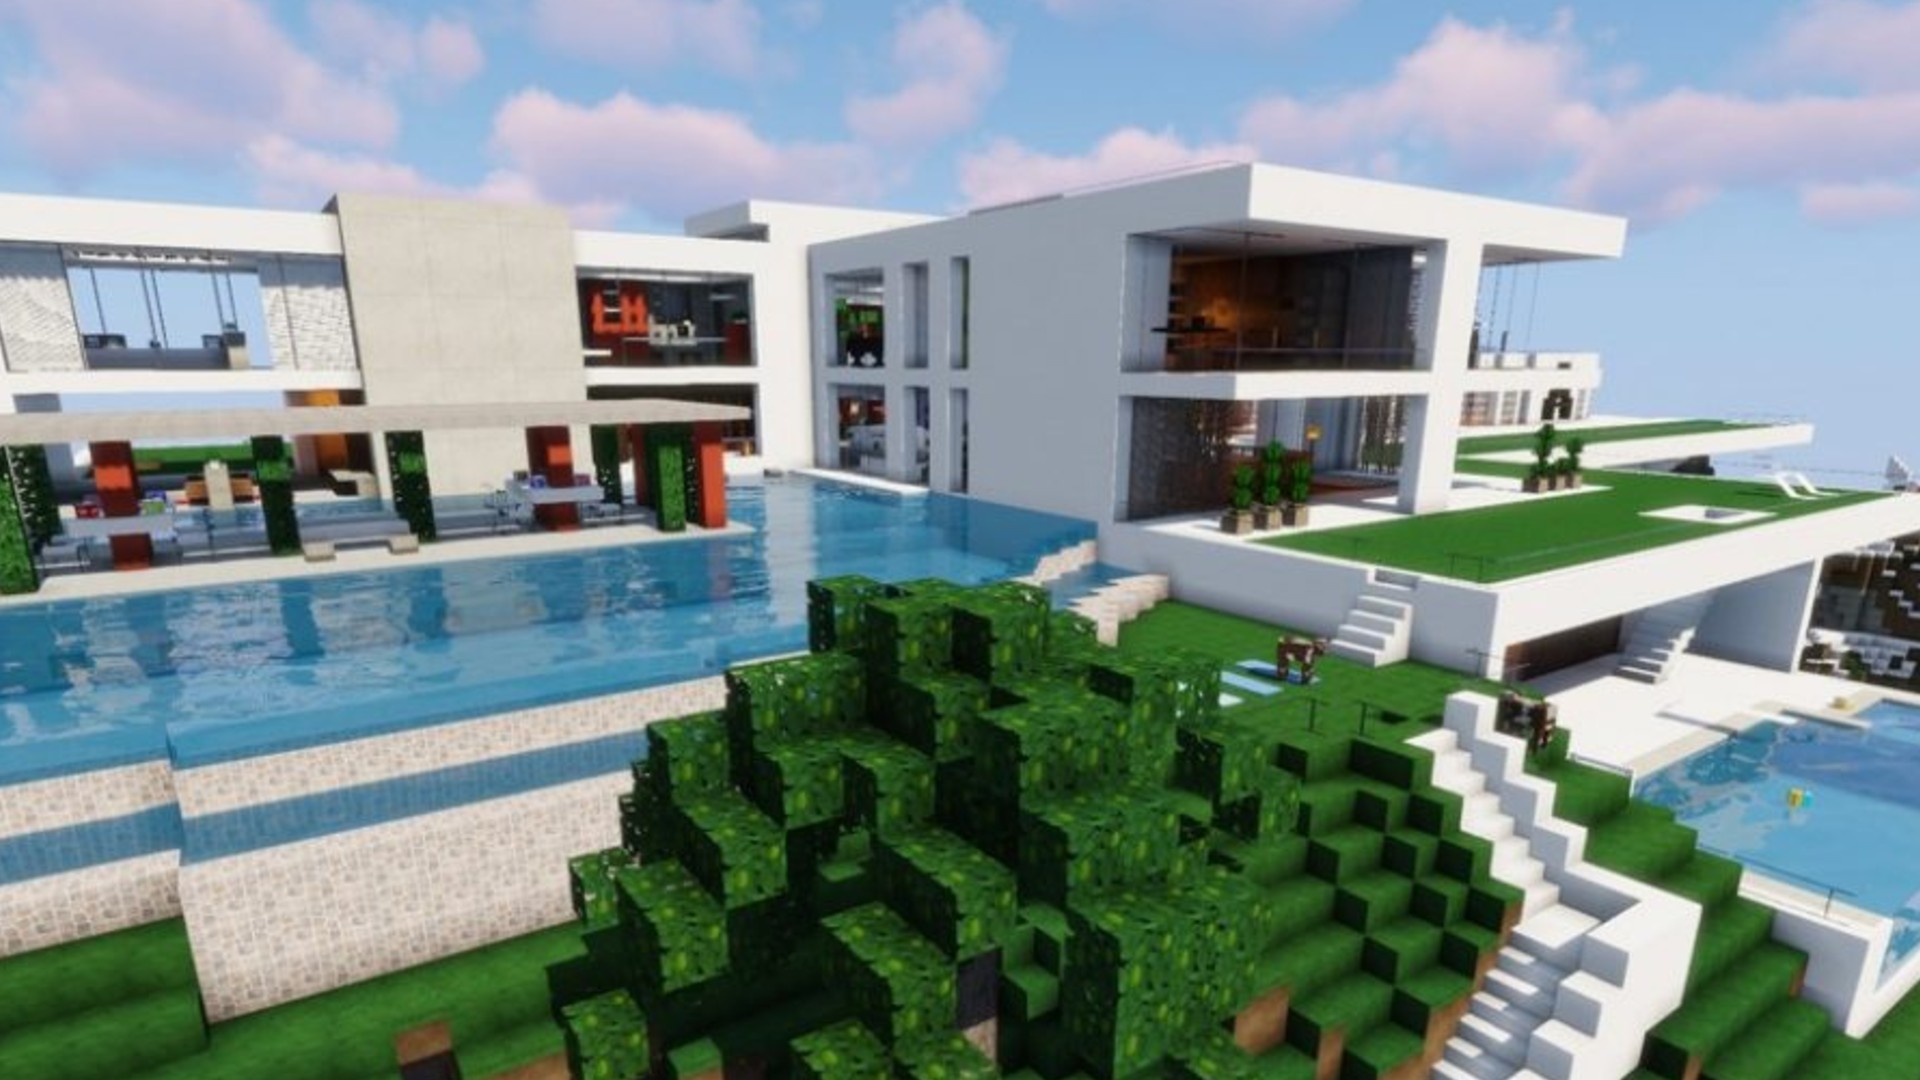 Cool Minecraft houses: ideas for your next build  PCGamesN